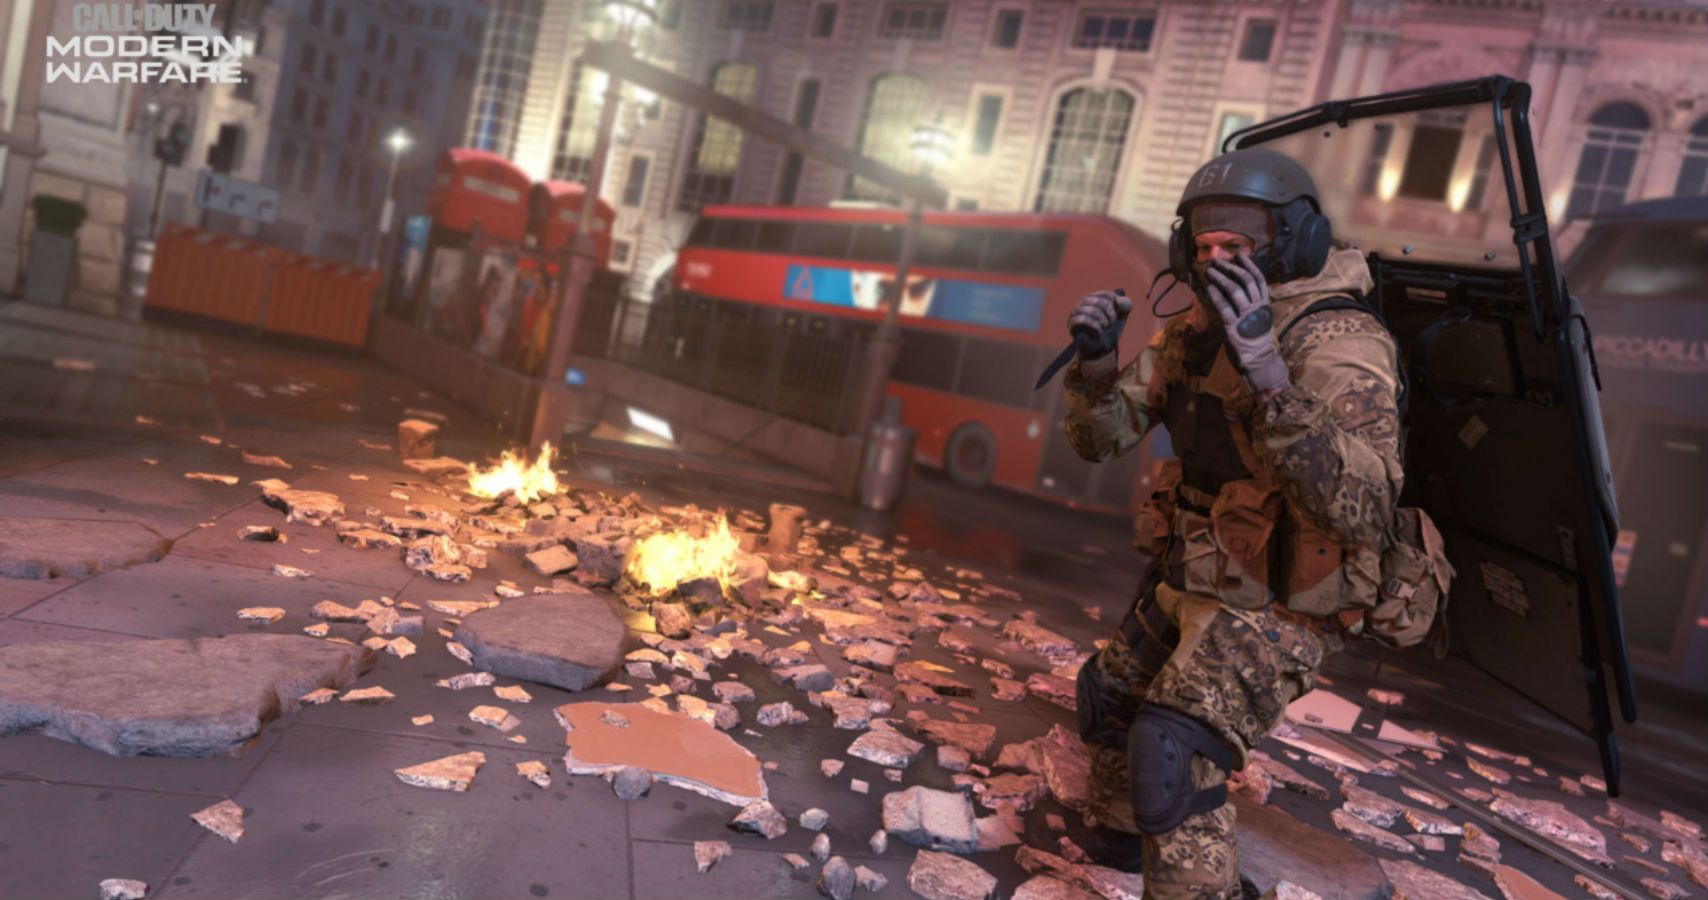 10 Ways To Use The Riot Shield In Call Of Duty: Warzone